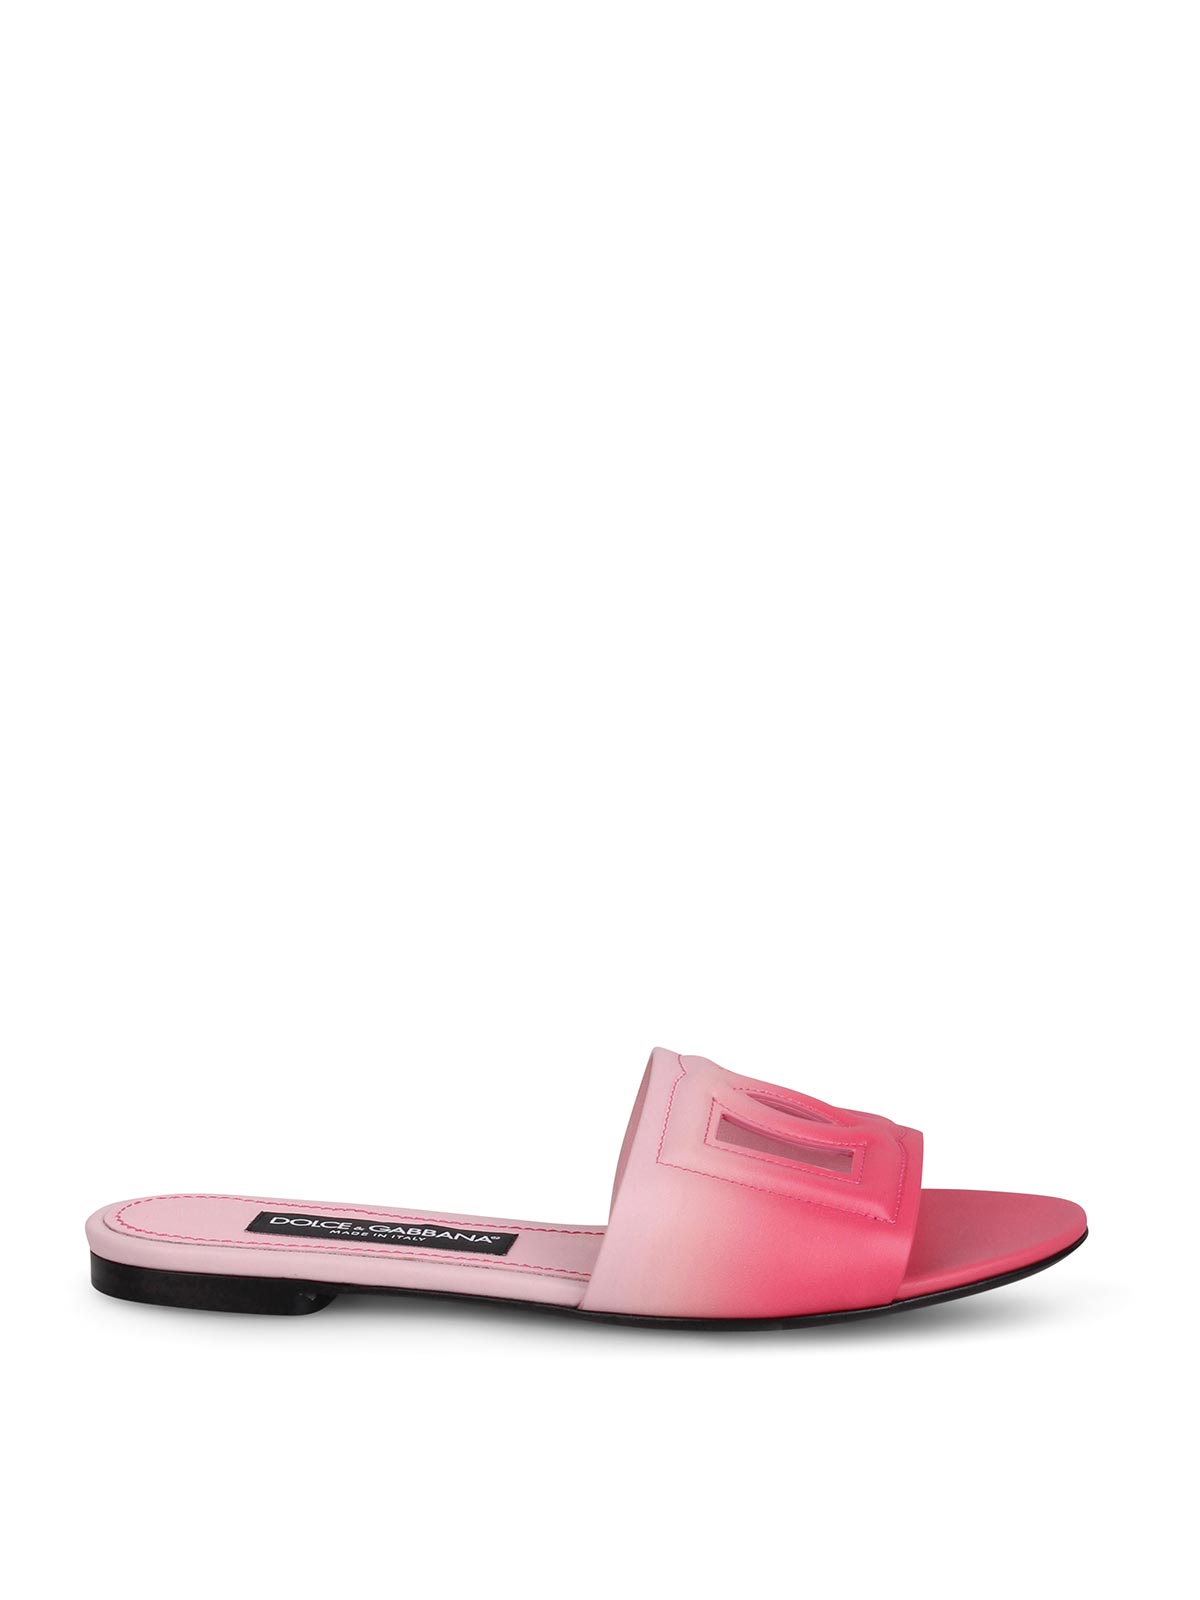 Dolce & Gabbana Leather Slide With Dg Logo In Pink